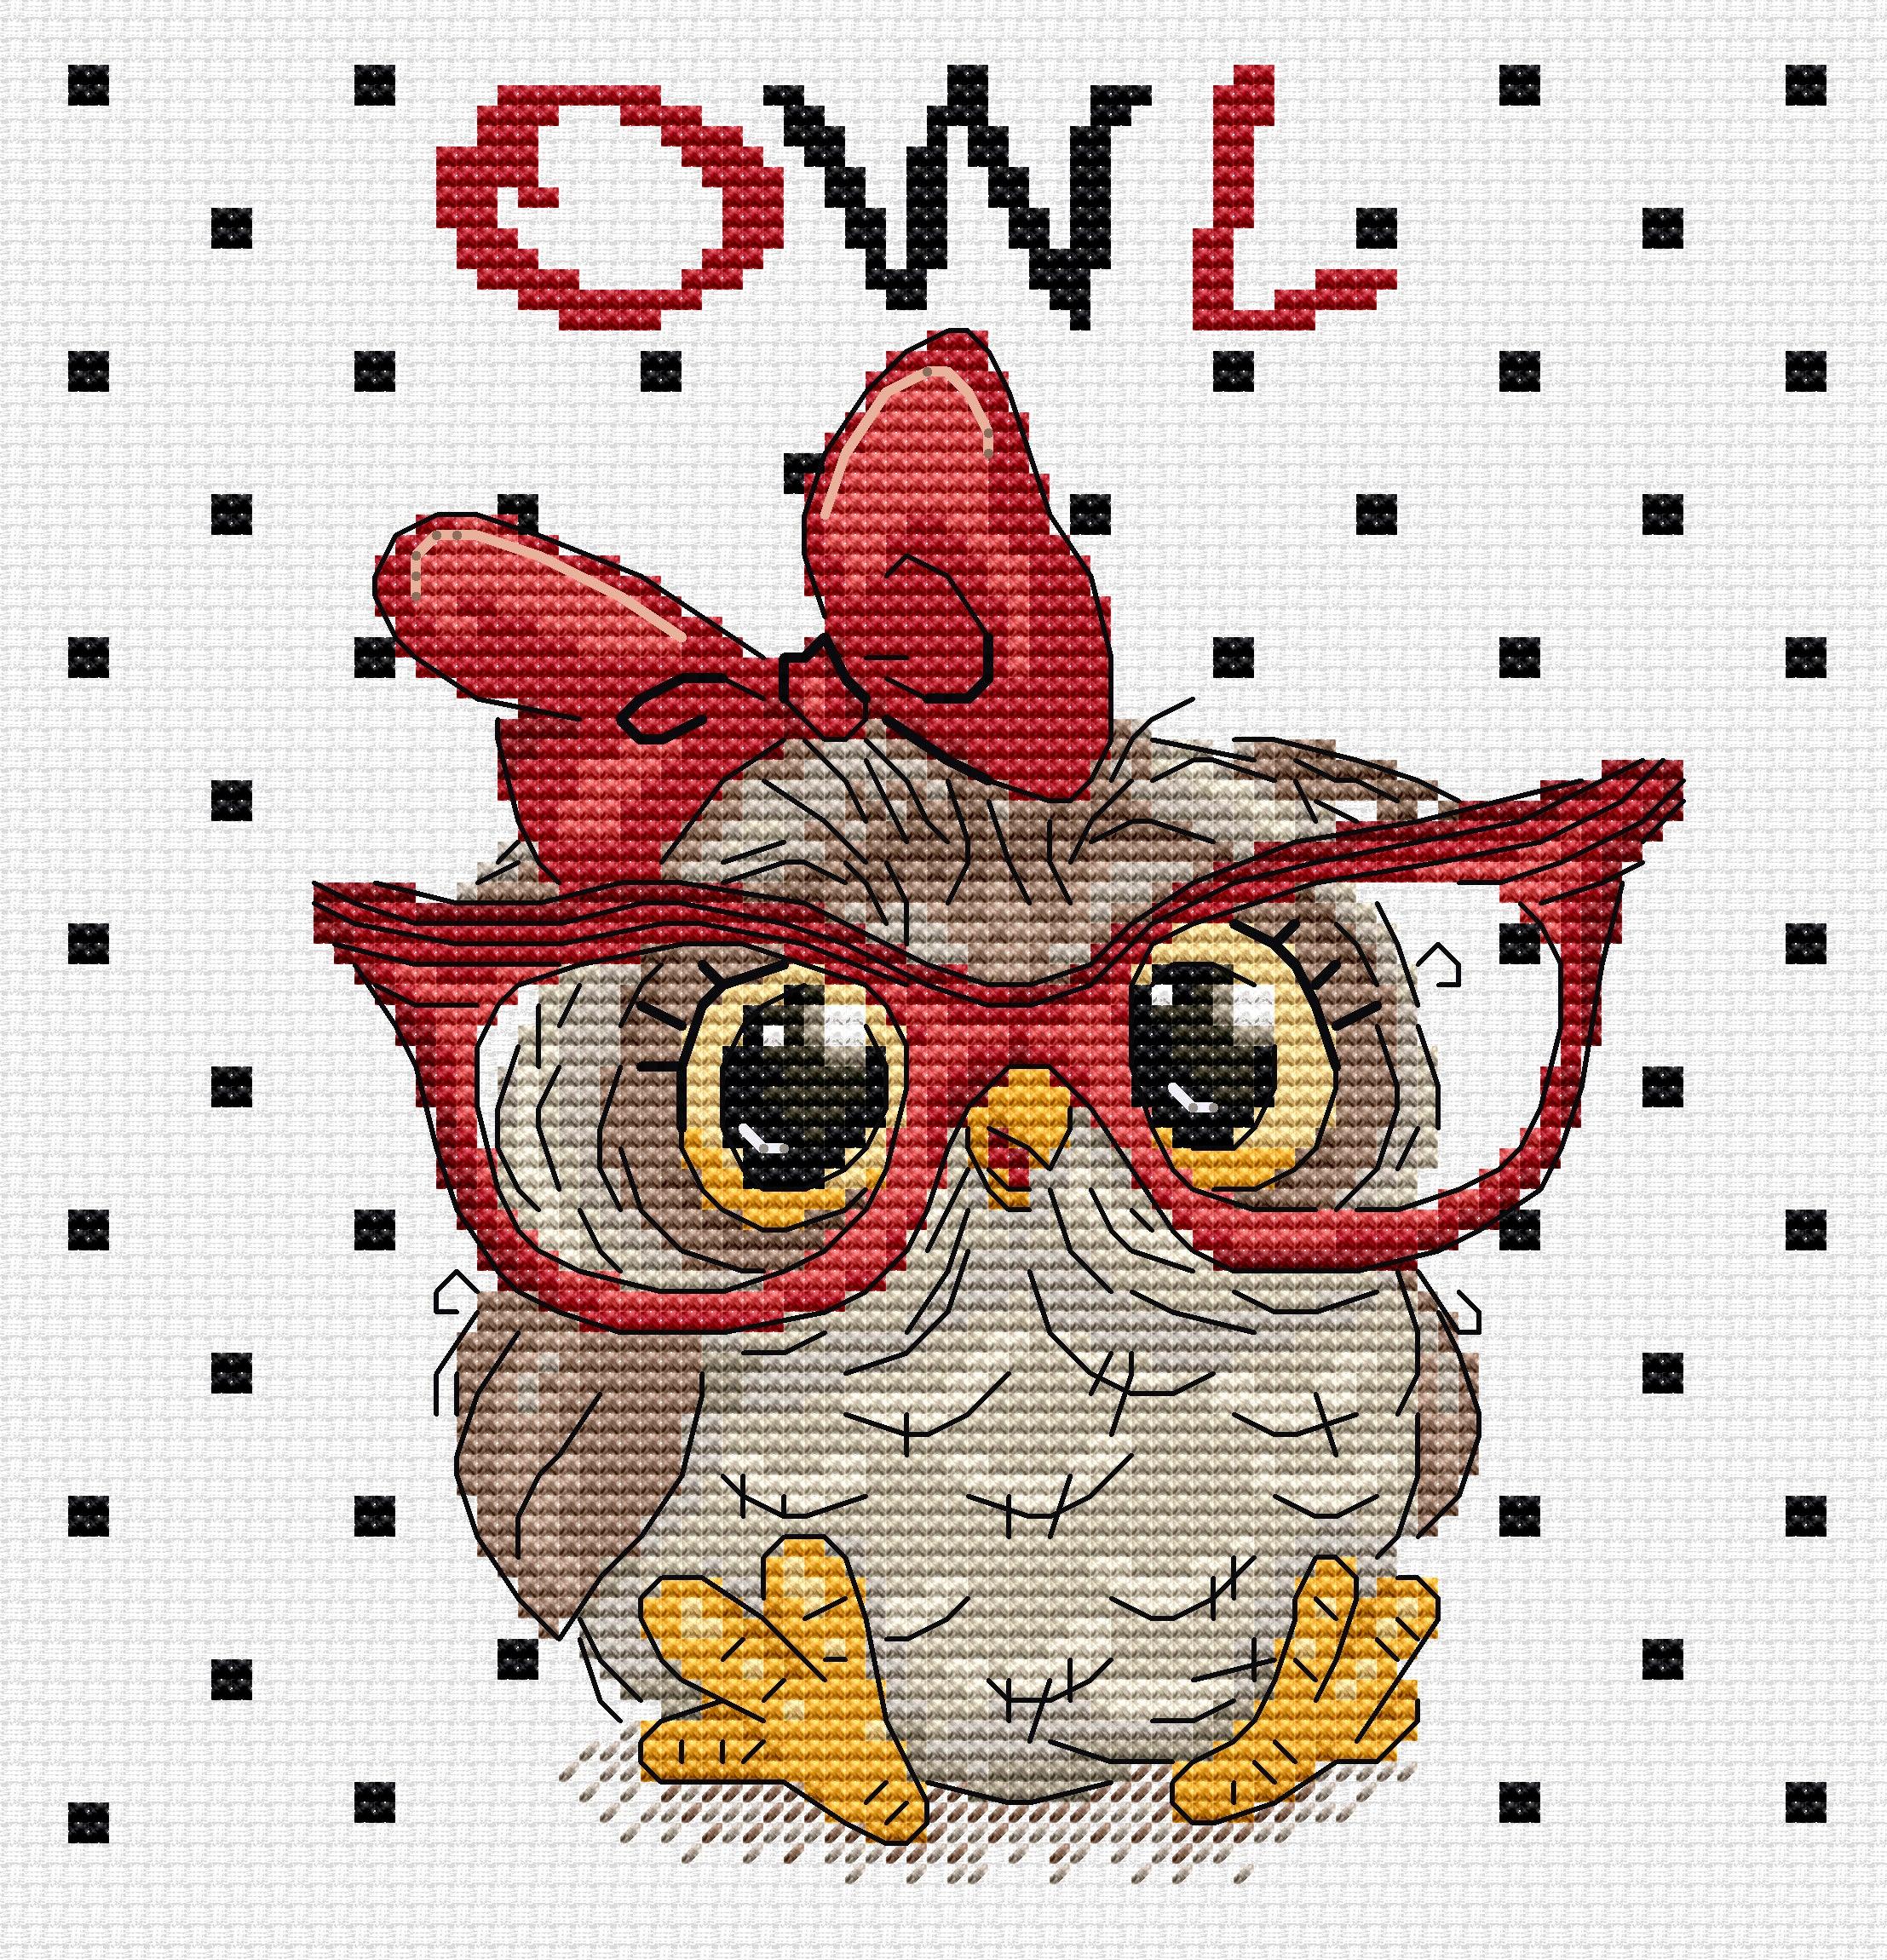 Cross Stitch Kit Luca-S - The Owl With Glasses, B1403 - Luca-S Cross Stitch Kits